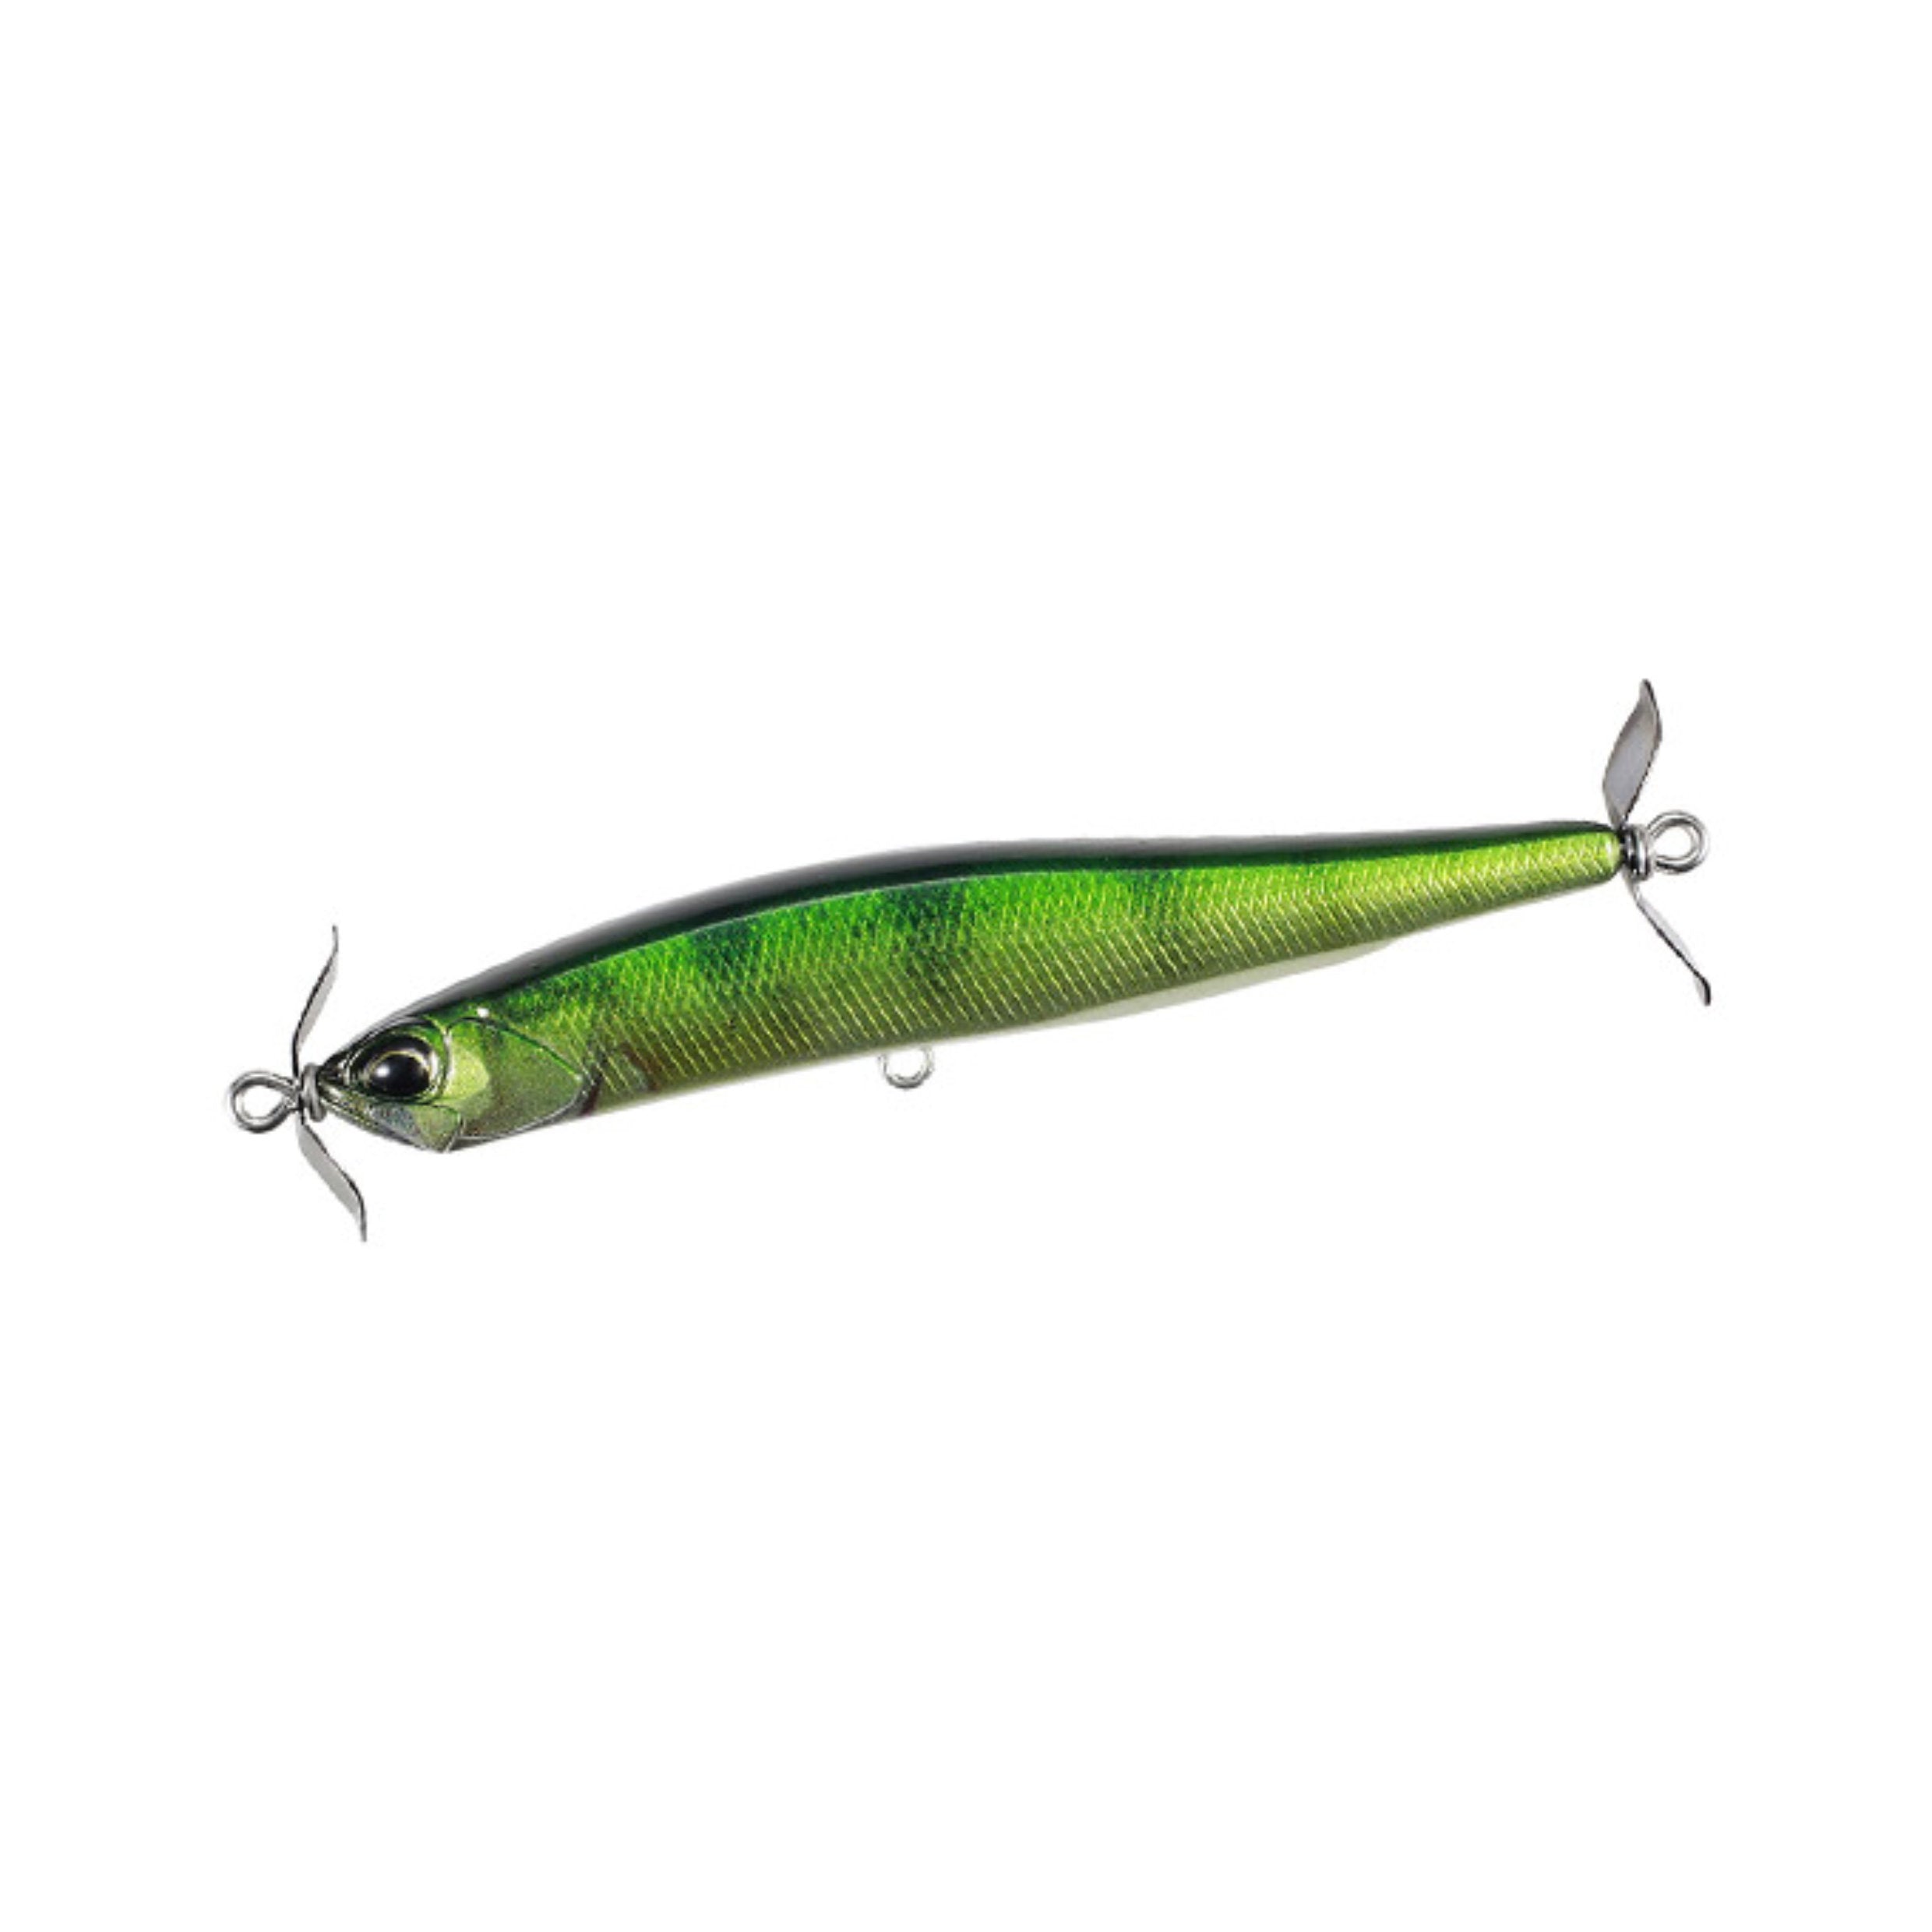 Duo Realis Spinbait 90 - I-Class Series – Natural Sports - The Fishing Store